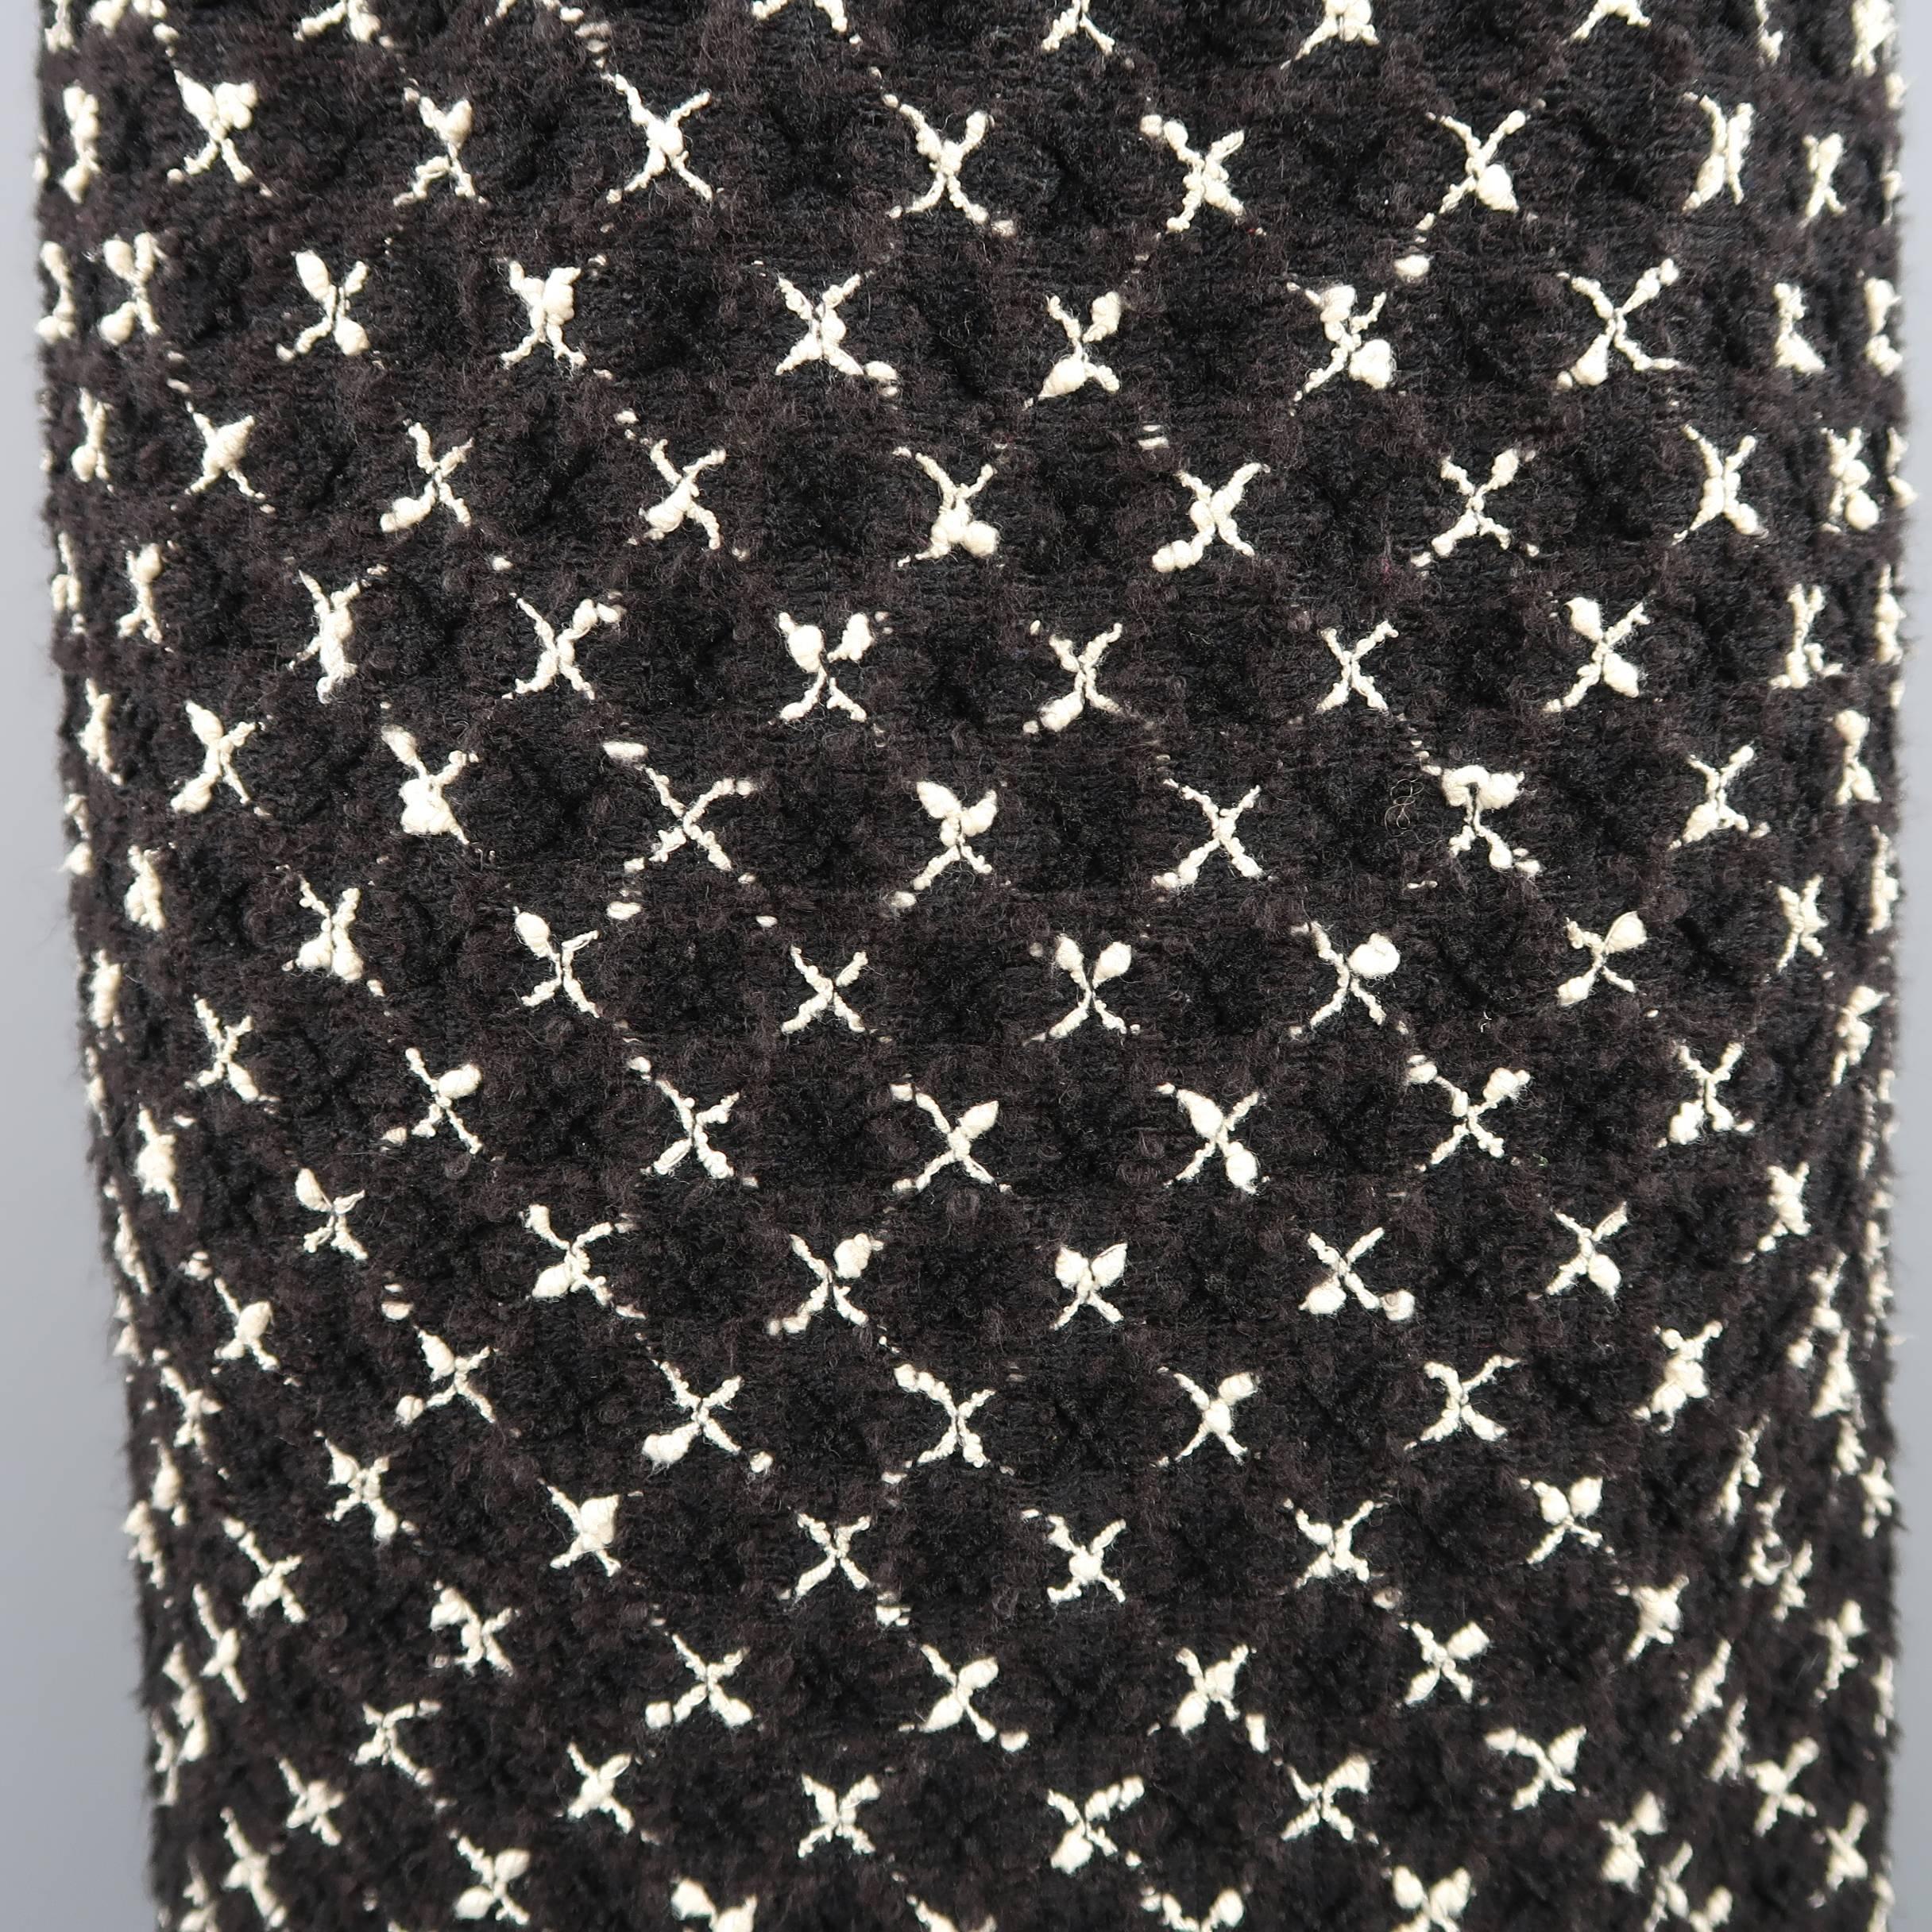 Vintage 1980's CHANEL A-line pencil skirt comes in a black and cream X cross print boucle tweed with a back zip closure and satin liner. Wear around zipper. Altered to fit a size small. As-Is. Made in France.
 
Fair Pre-Owned Condition.
Marked: FR